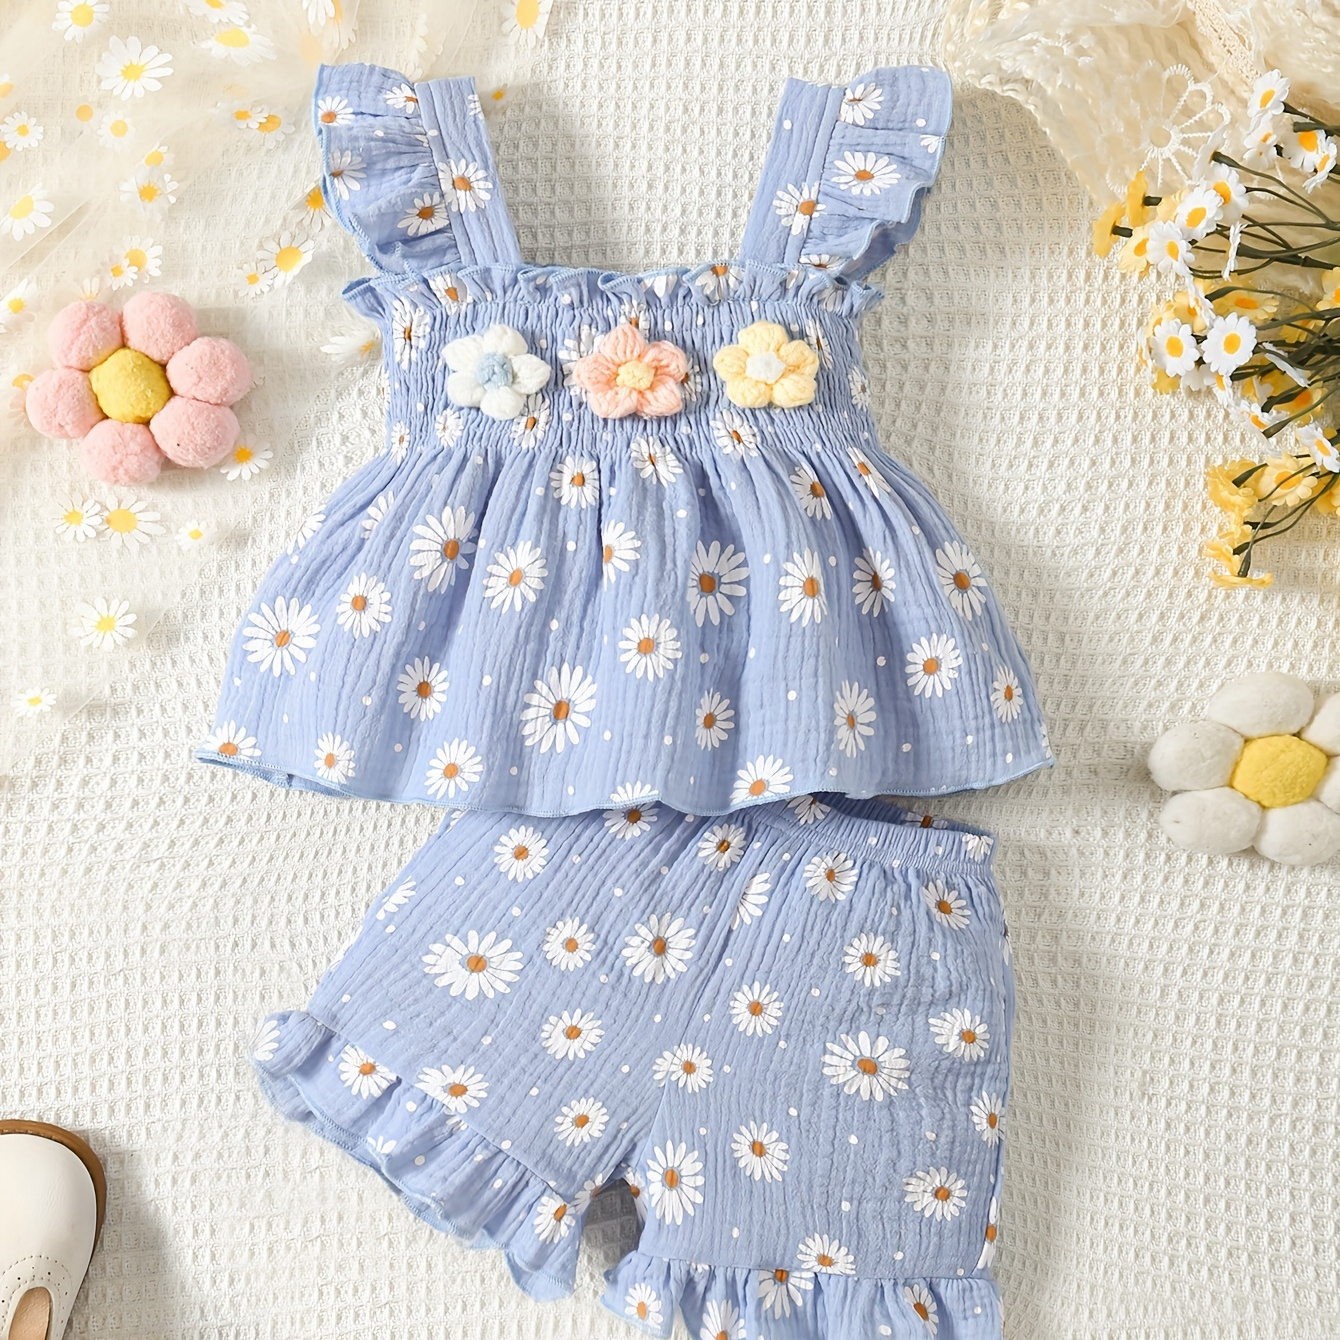 

Baby's Cartoon Daisy Full Print 2pcs Lovely Summer Outfit, Knit Flower Decor Shirred Peplum Top & Muslin Shorts Set, Toddler & Infant Girl's Clothes For Daily/holiday, As Gift